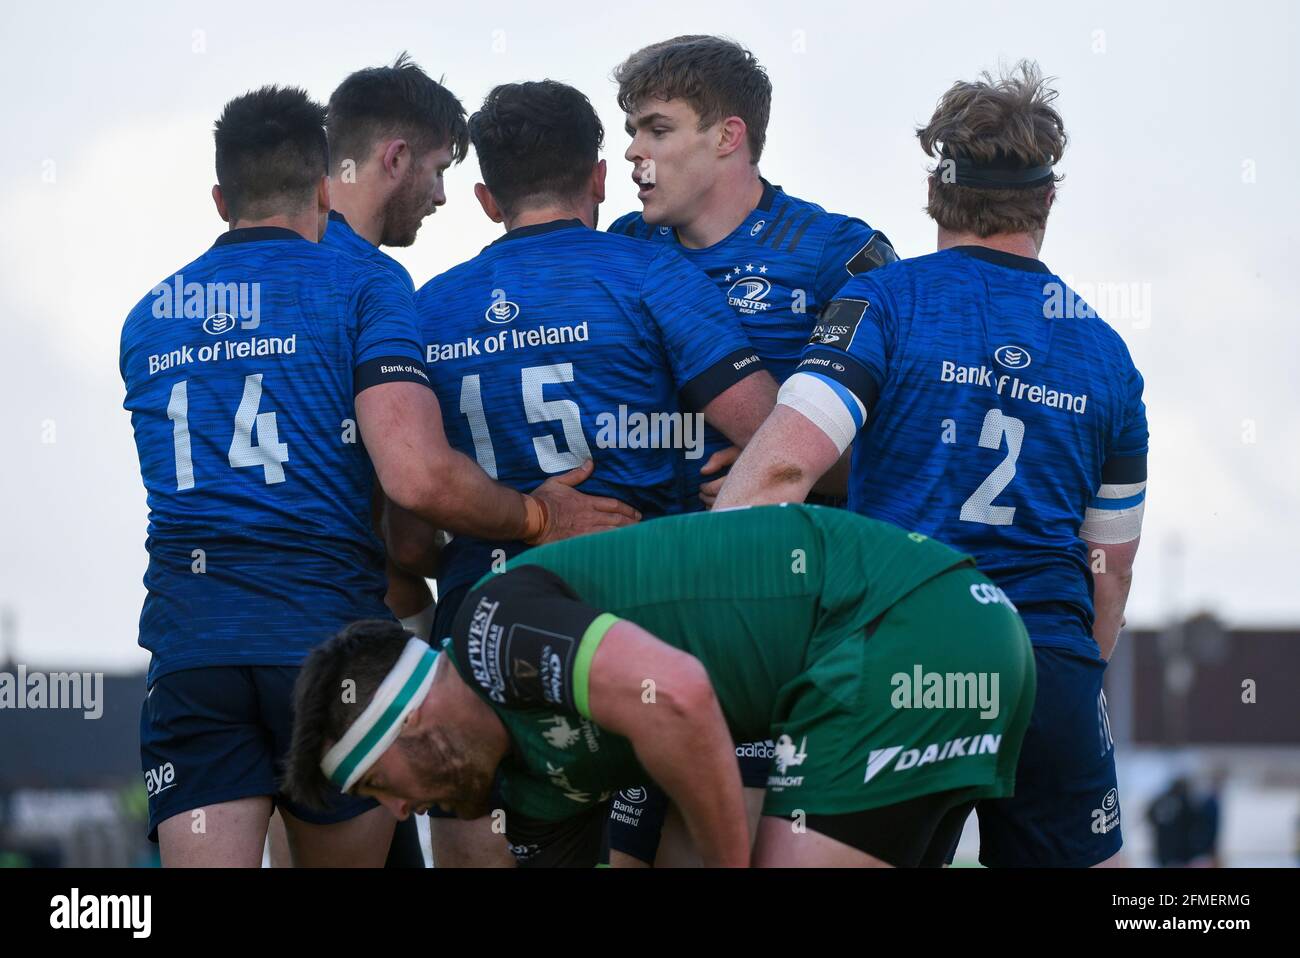 Hugo KEENAN of Leinster celebrates scoring with Cian KELLEHER of Leinster, James TRACY of Leinster, Luke MCGRATH of Leinster and Ross BYRNE of Leinster during the Guinness PRO14 Rainbow Cup Round 2